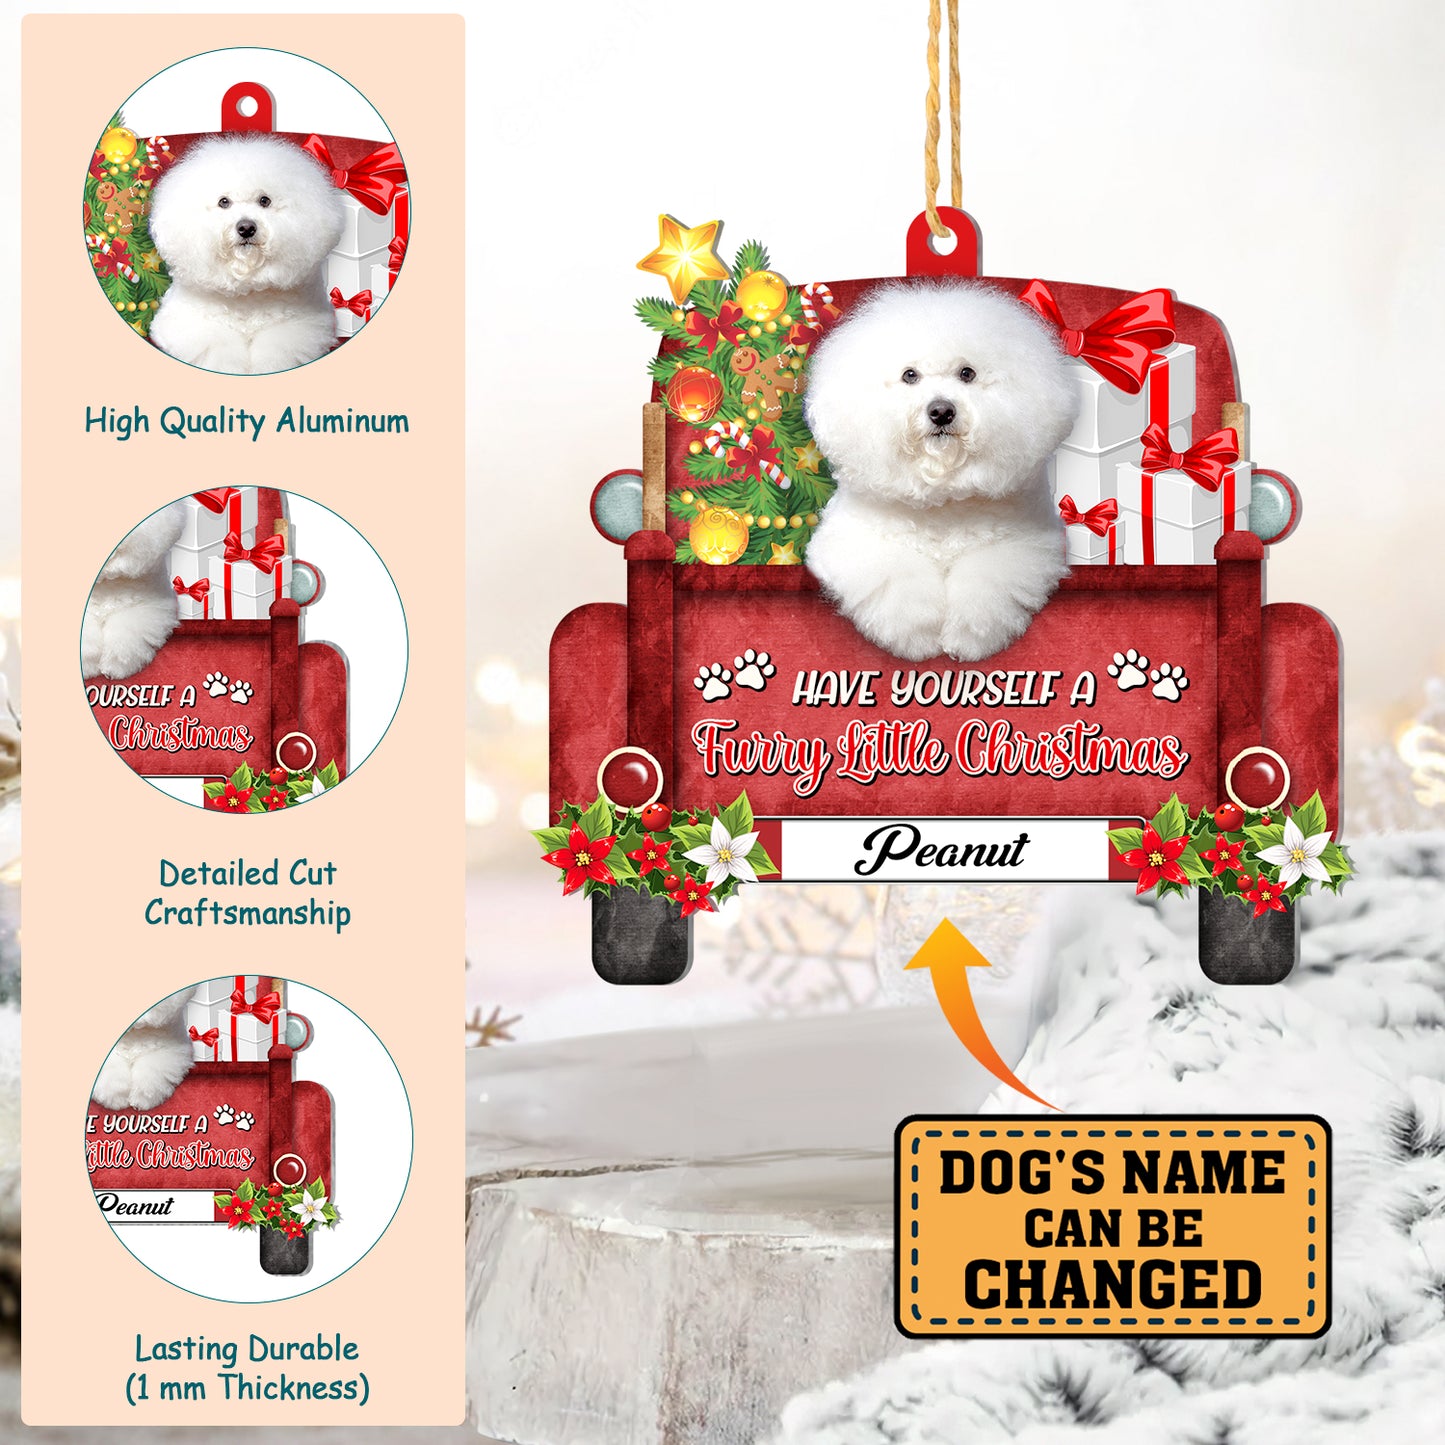 Personalized Bichon Frise Red Truck Christmas Aluminum Ornament